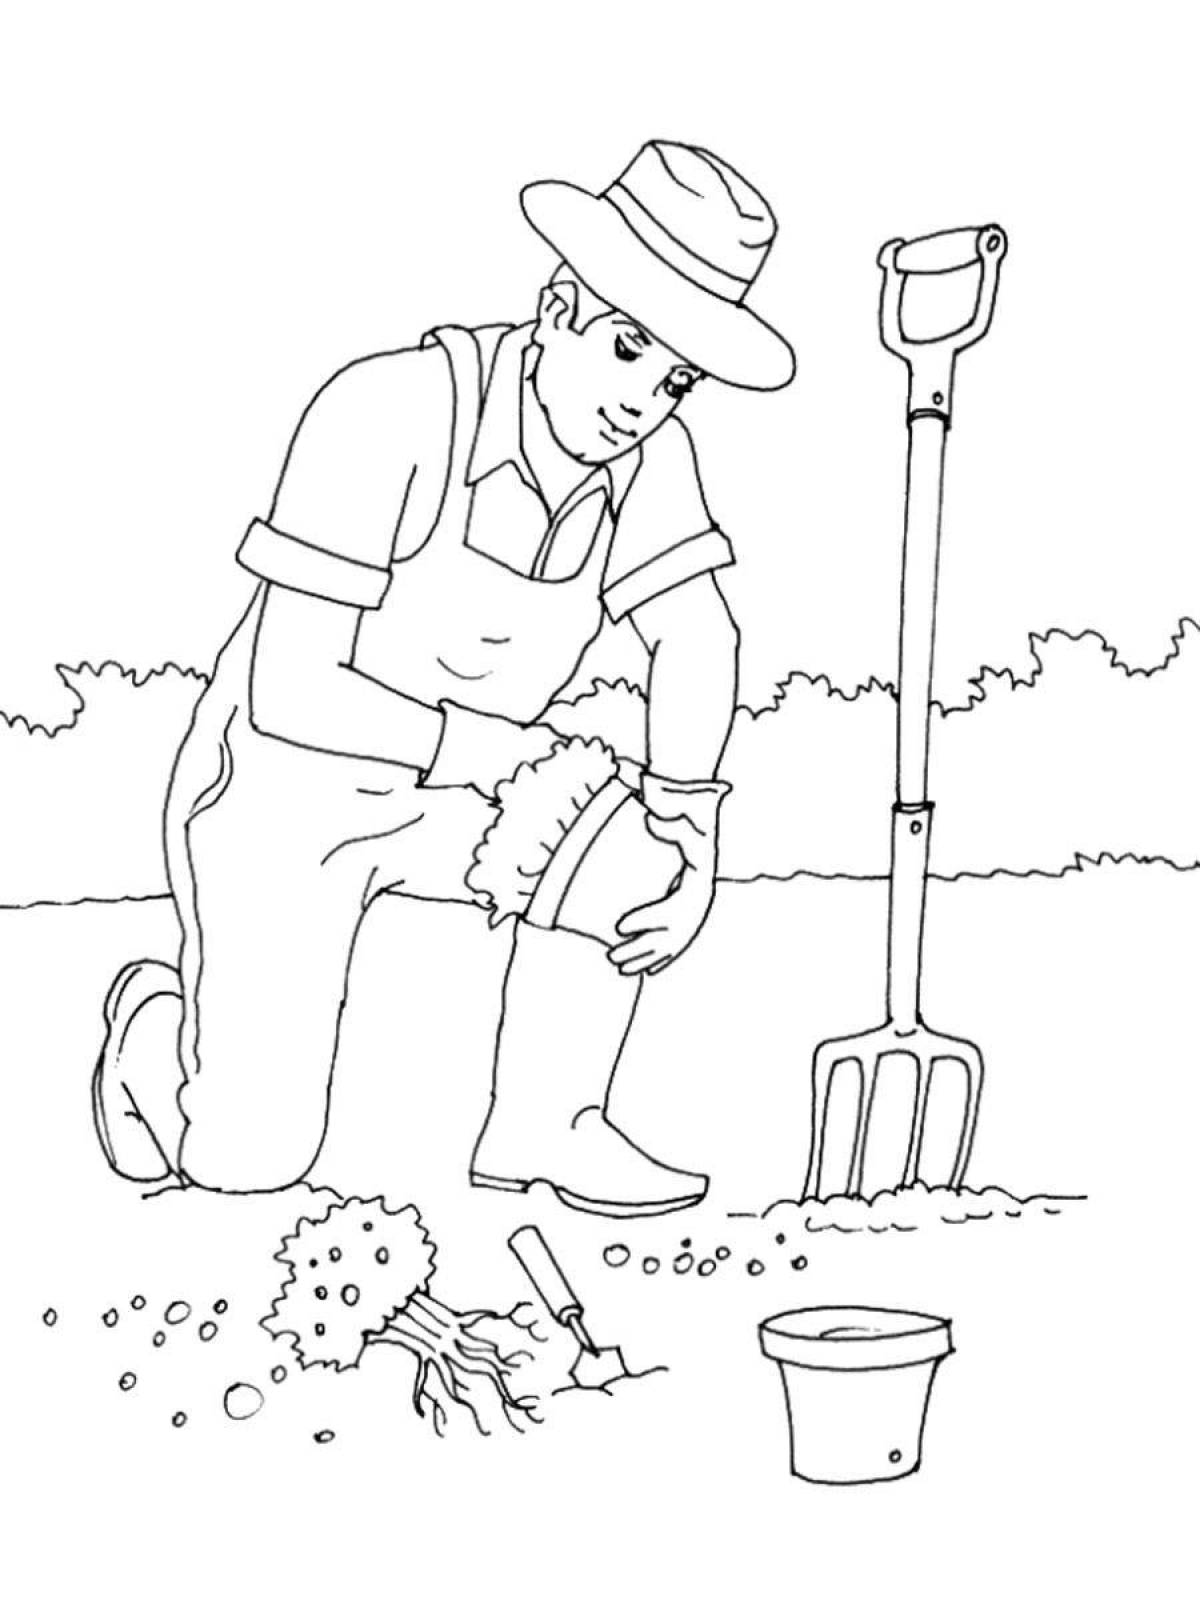 Farmer coloring page